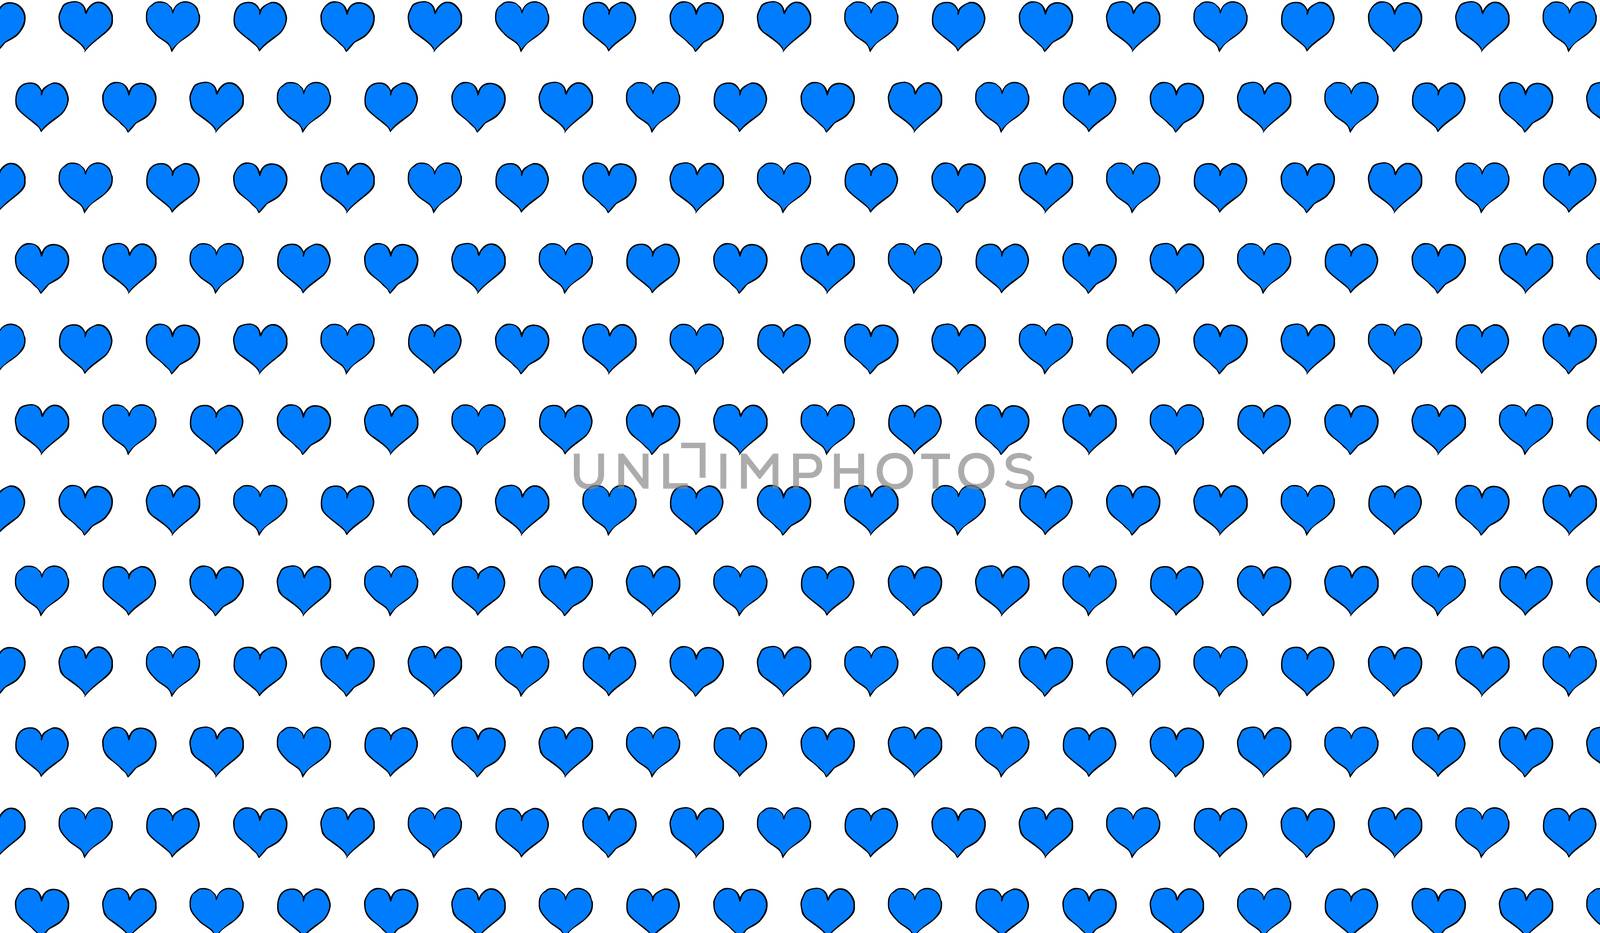 2d blue pattern of cartoon hearts on isolated background by Andreajk3